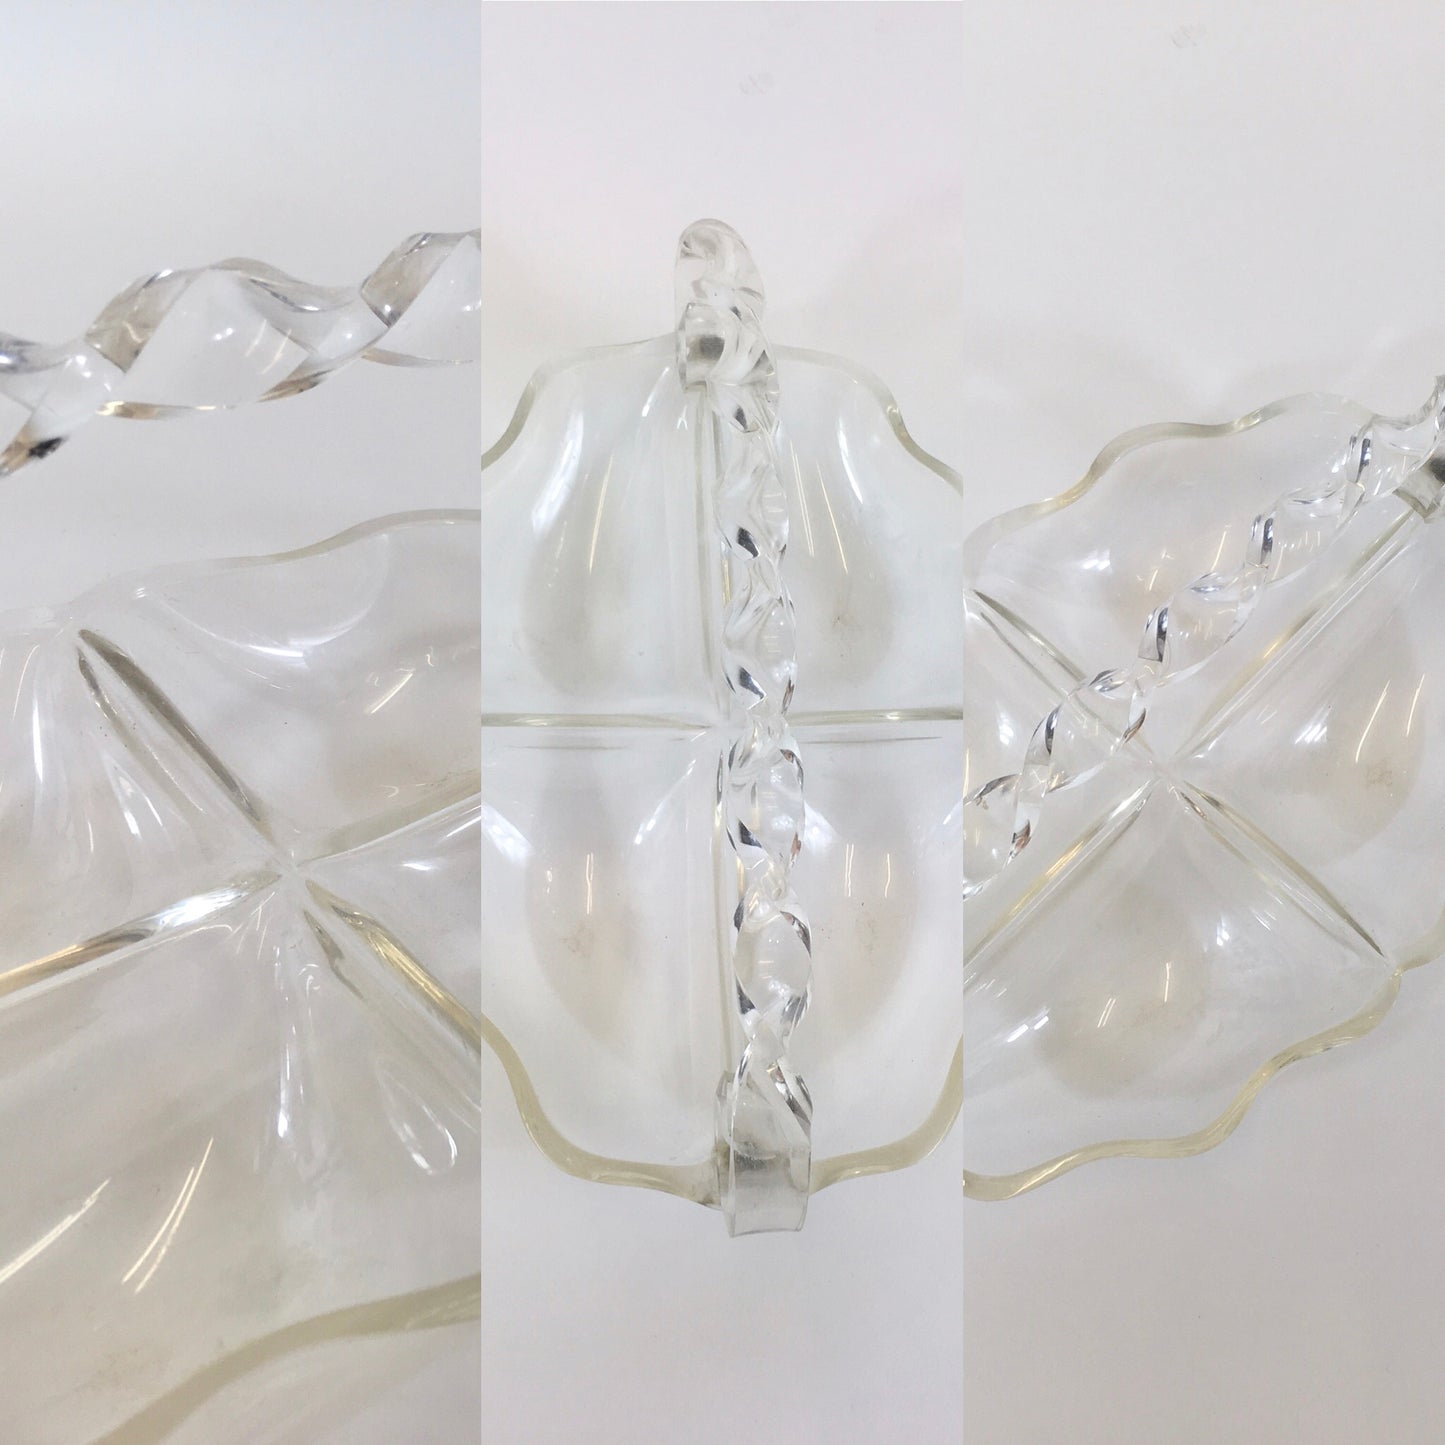 Original 1950’s Clear Lucite Compartment Tray - With Twisted Handle